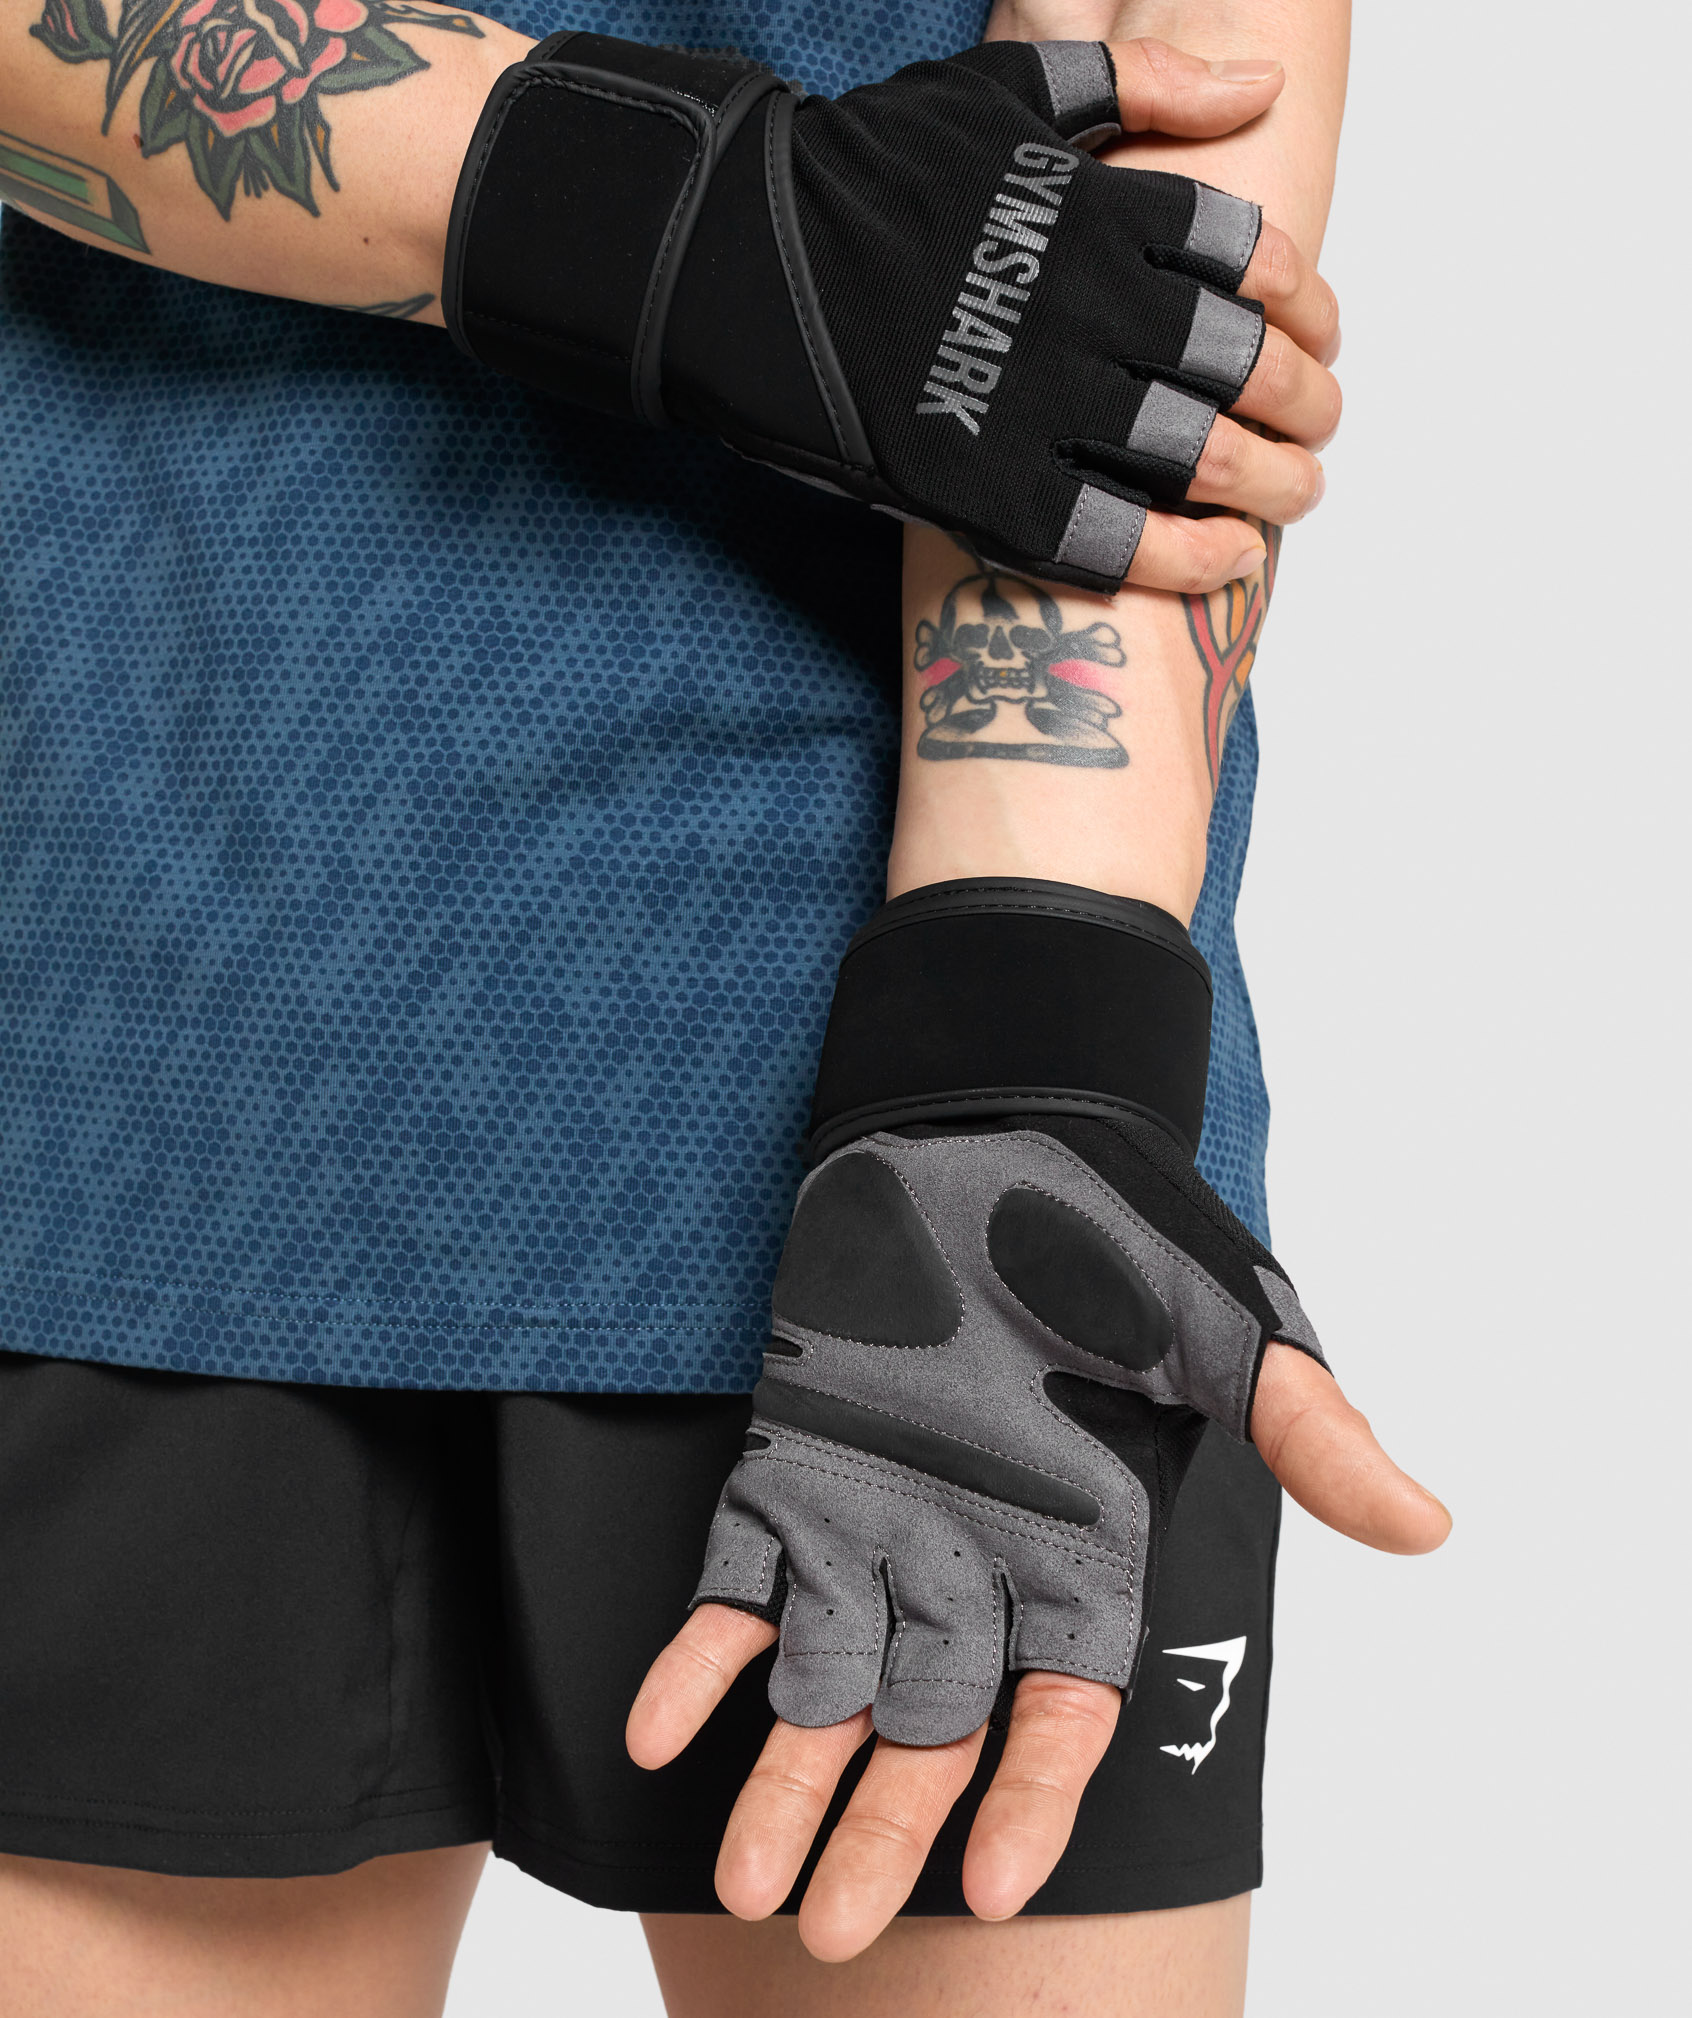 The Benefits Of Weightlifting Gloves, Wrist Wraps And Lifting Straps And  When You Should Wear Them